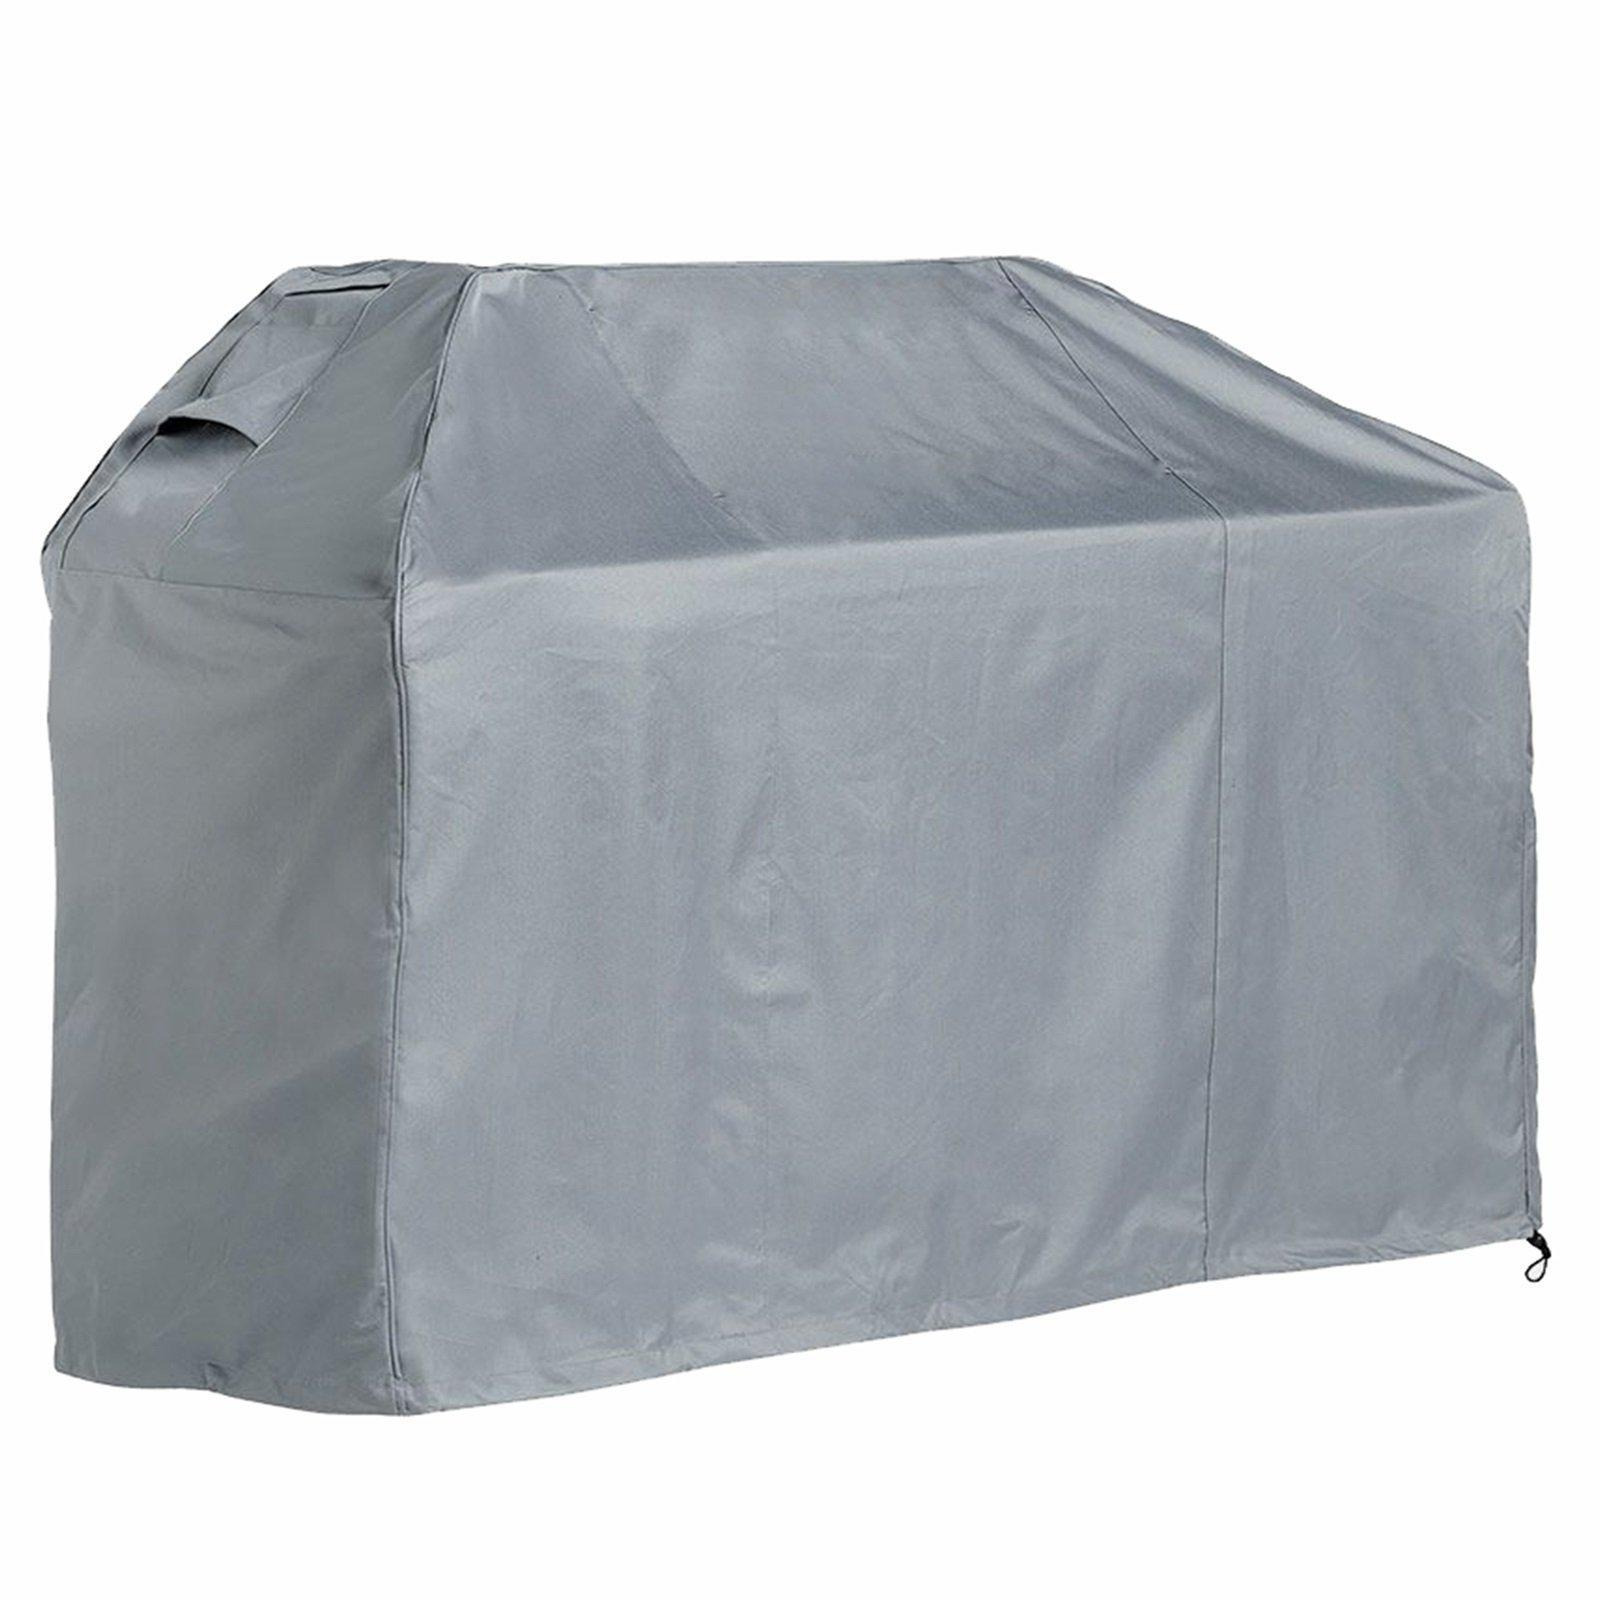 Garden Waterproof Barbecue Cover BBQ Protector - image 1